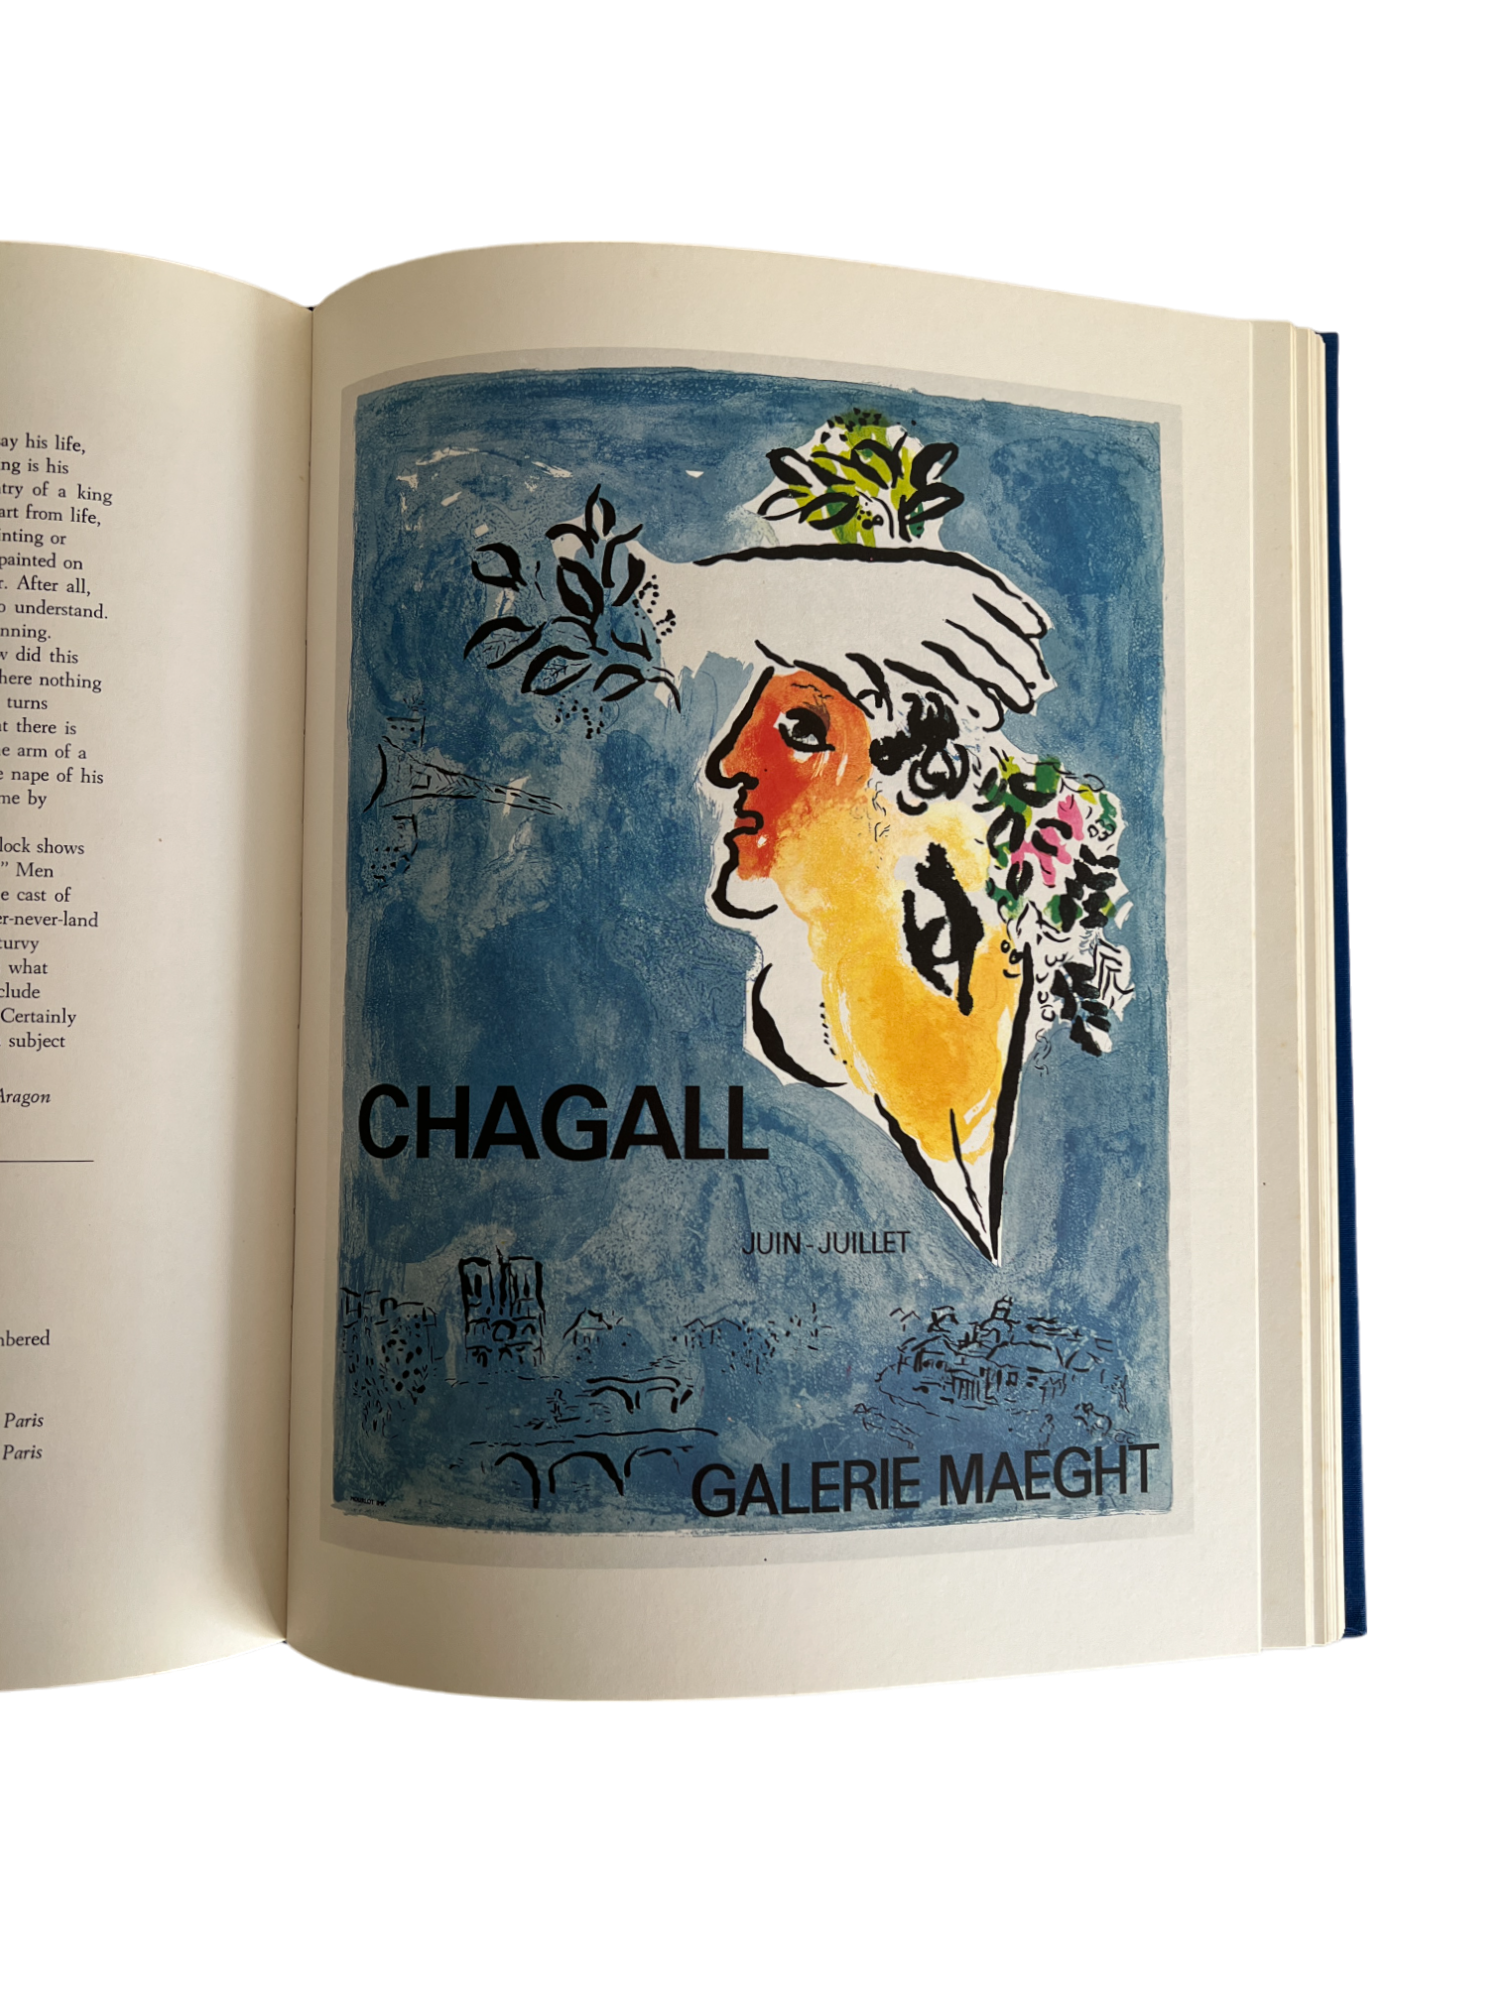 Chagall Posters, 1975, Printed in Paris